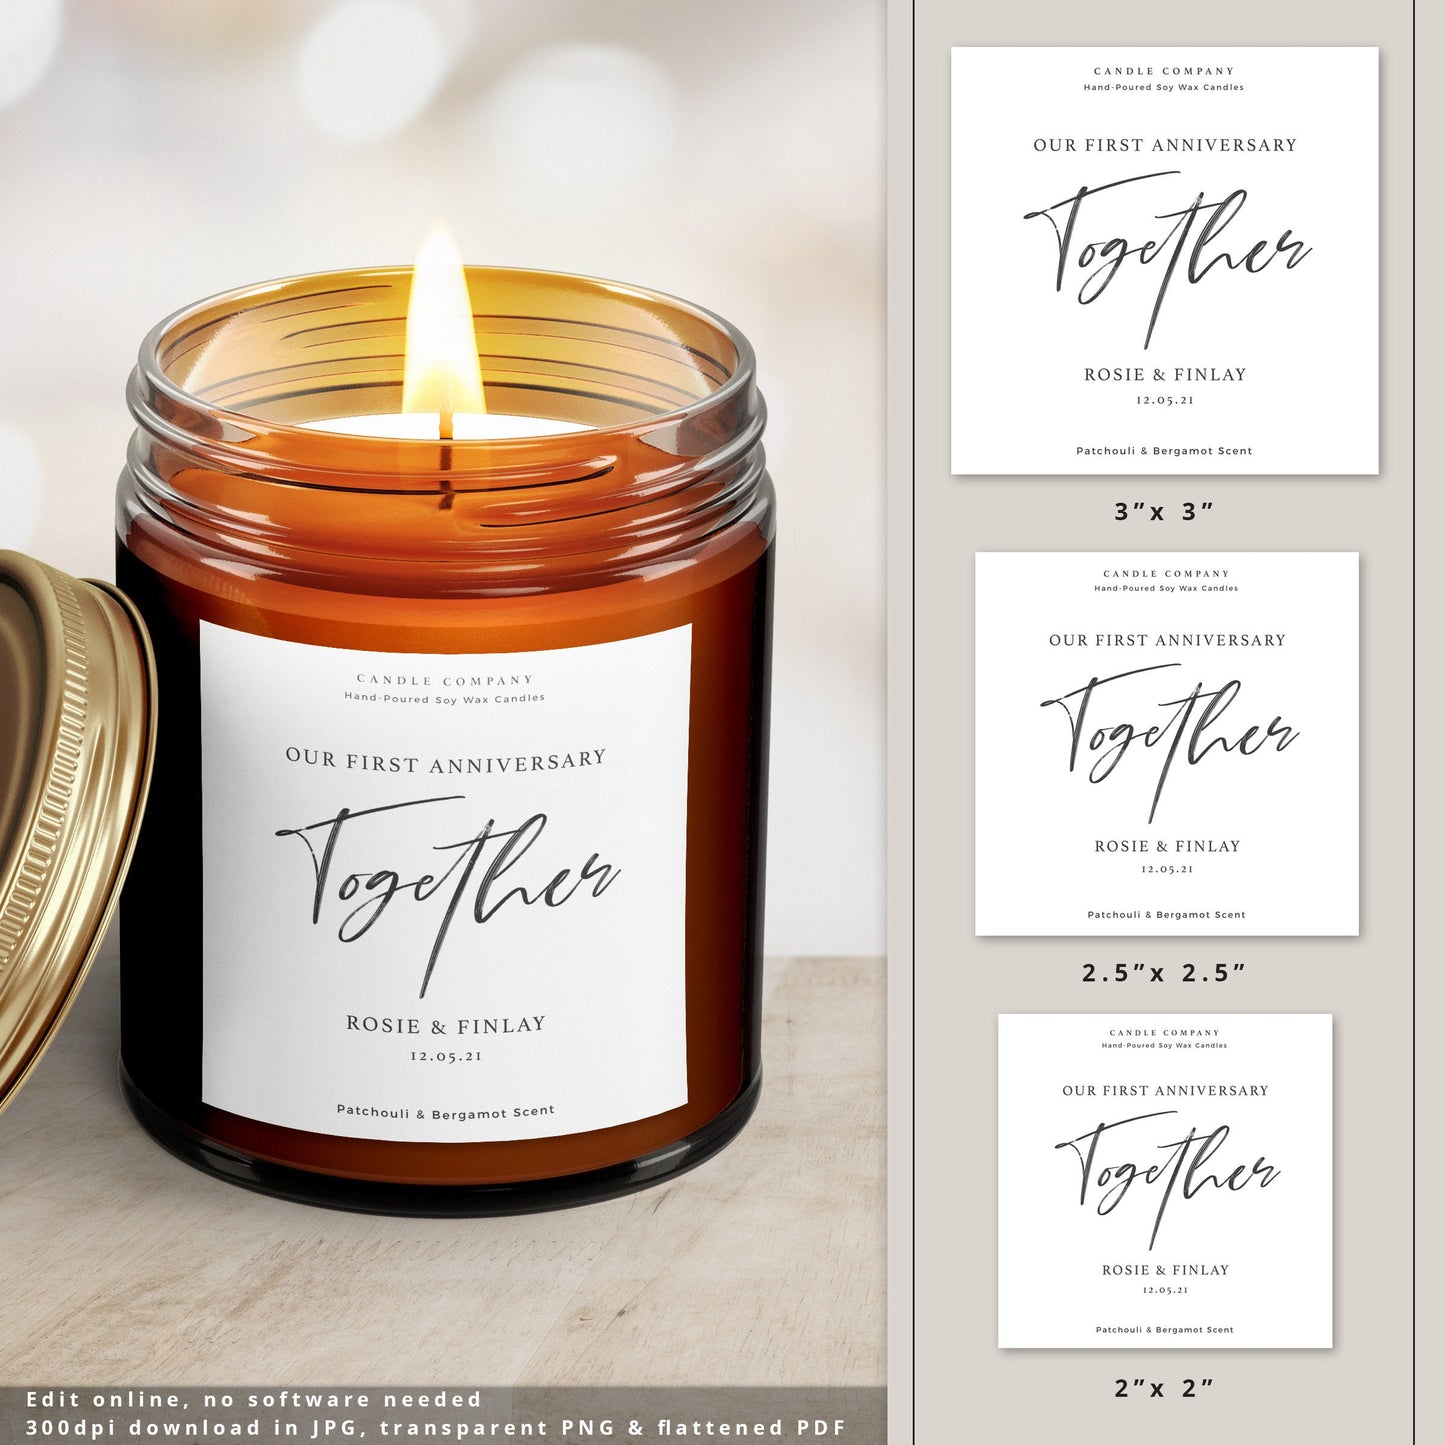 Editable Candle Labels Personalised Wedding Anniversary Label Template INSTANT DOWNLOAD Product Label Design - Corjl Label  PR0585